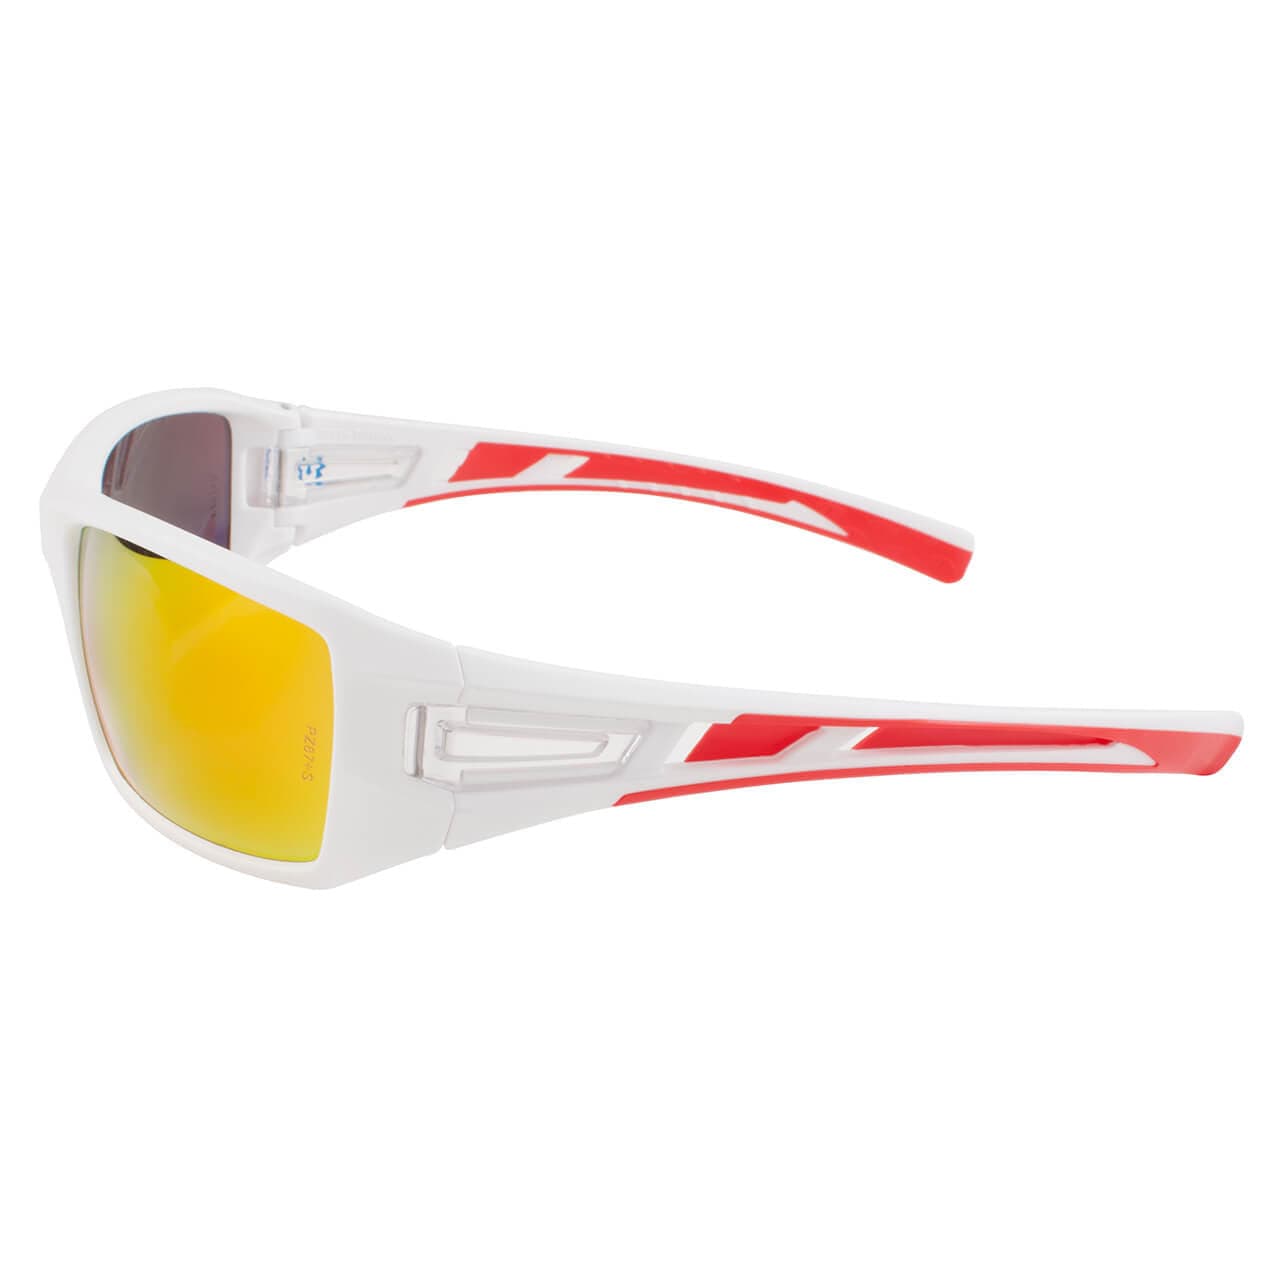 Metel M30 Safety Glasses with White Frame and Orange Mirror Lenses Side View